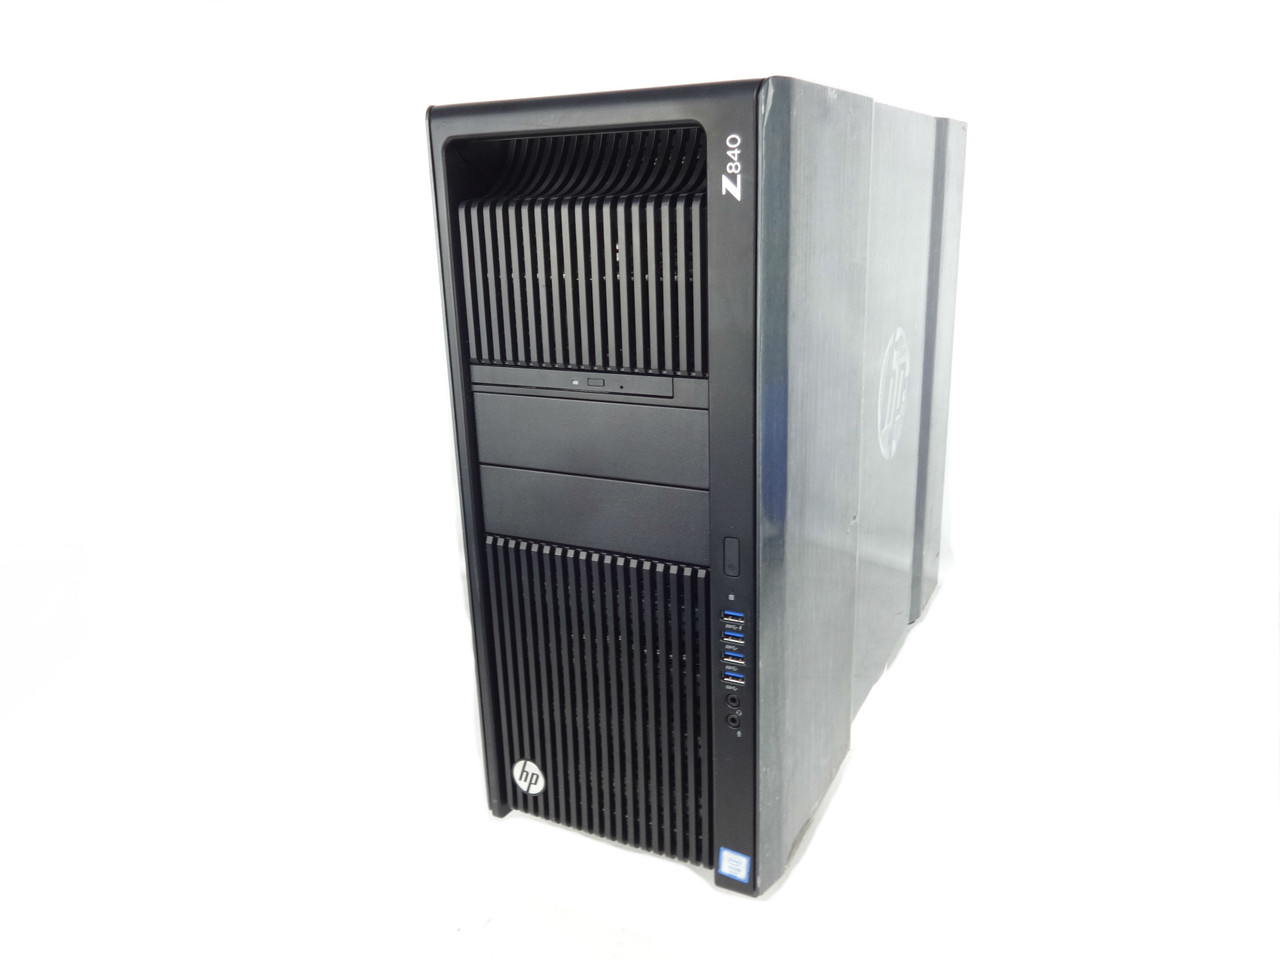 HP Z840 Tower Workstation Dual CPU Build to Order